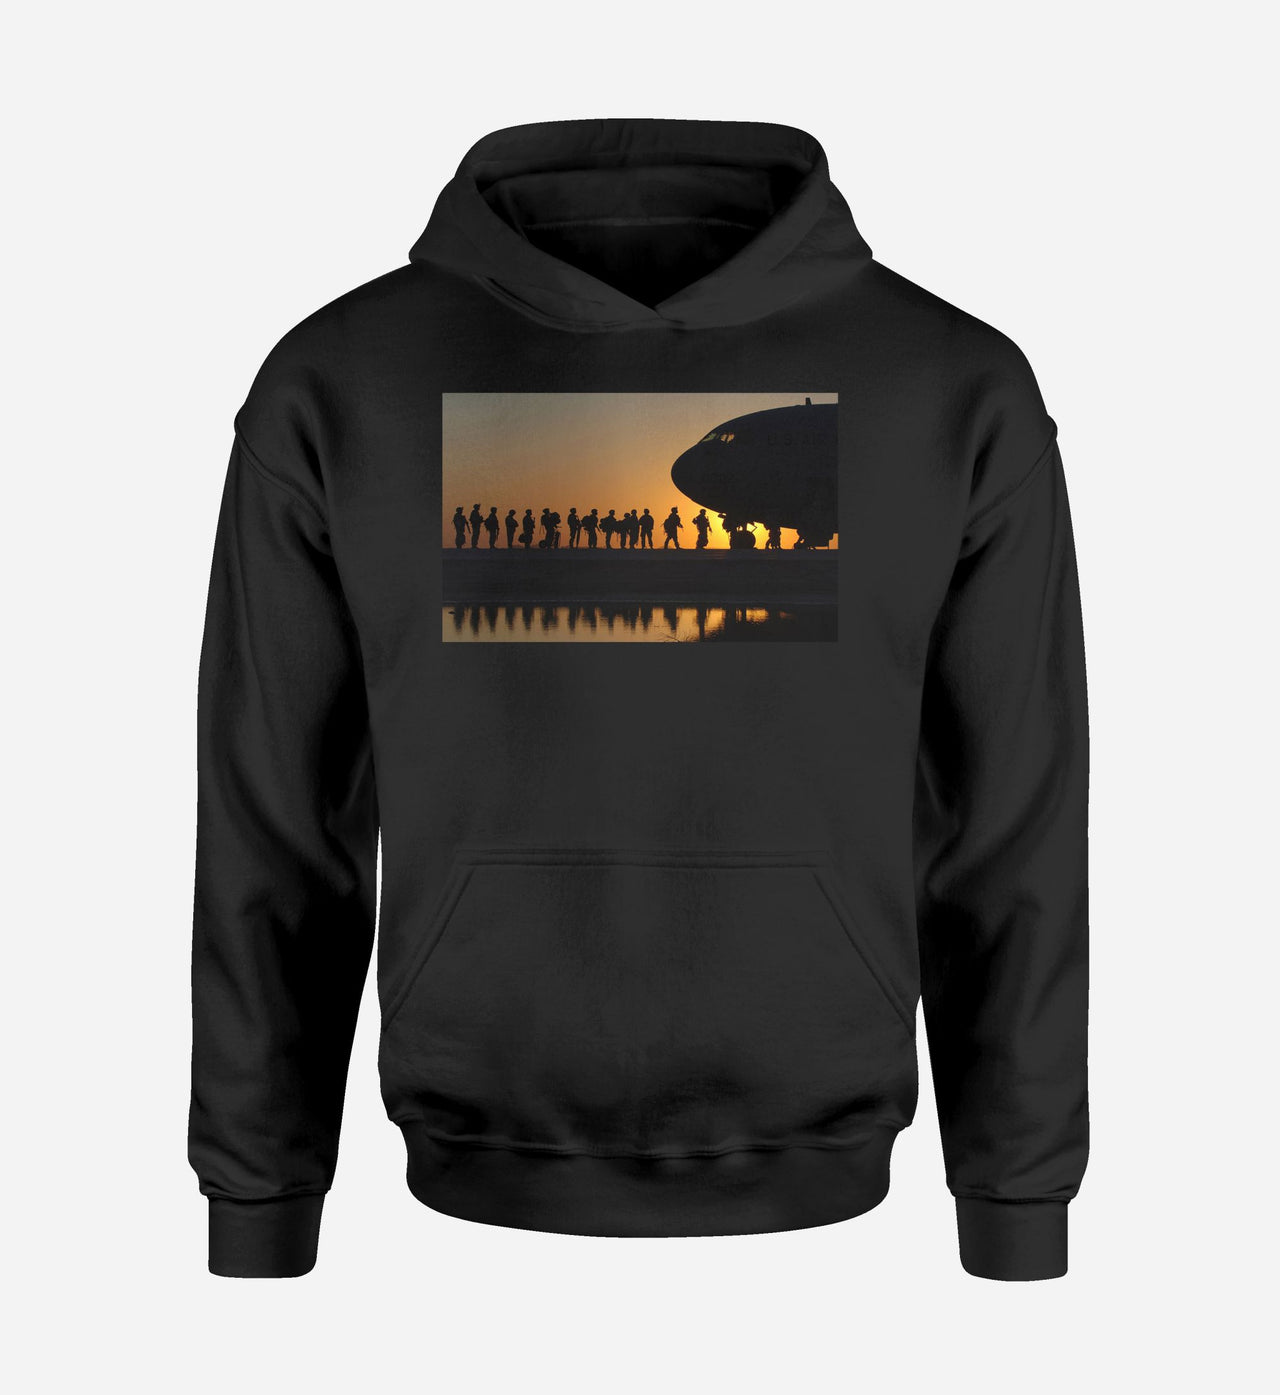 Band of Brothers Theme Soldiers Designed Hoodies